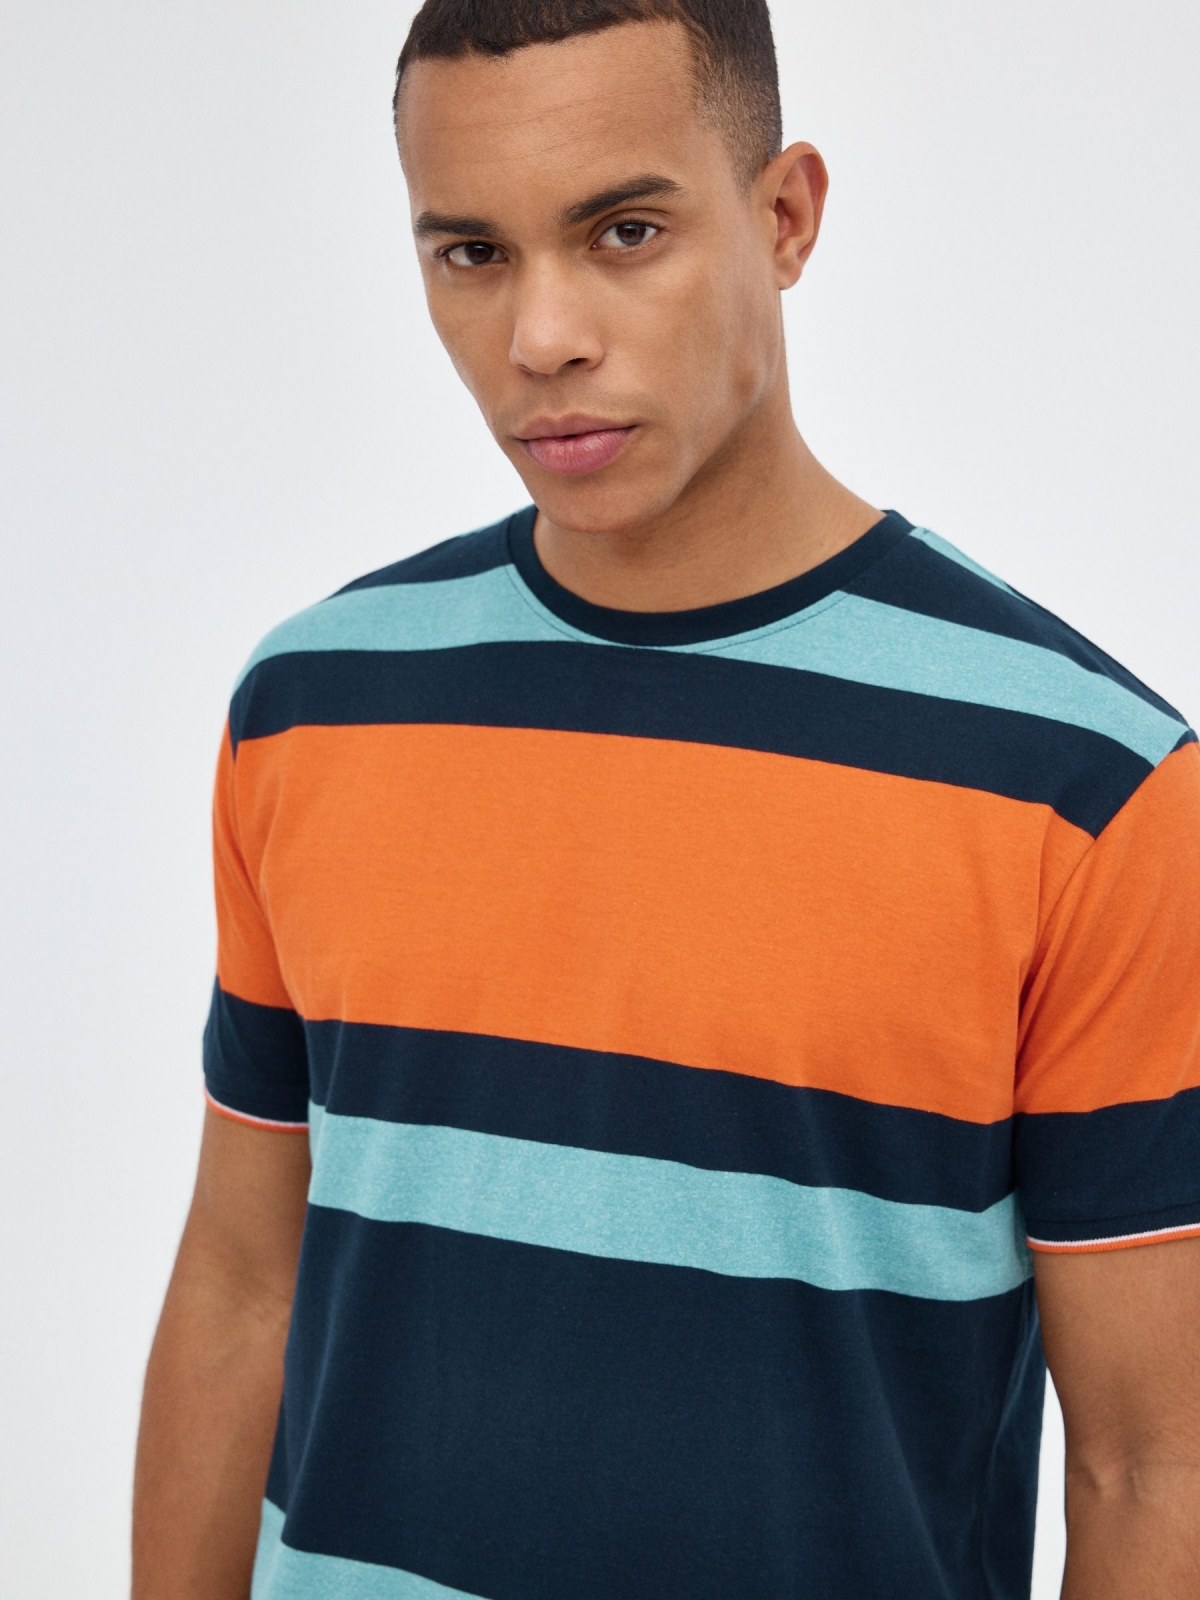 Blue and orange striped T-shirt blue detail view